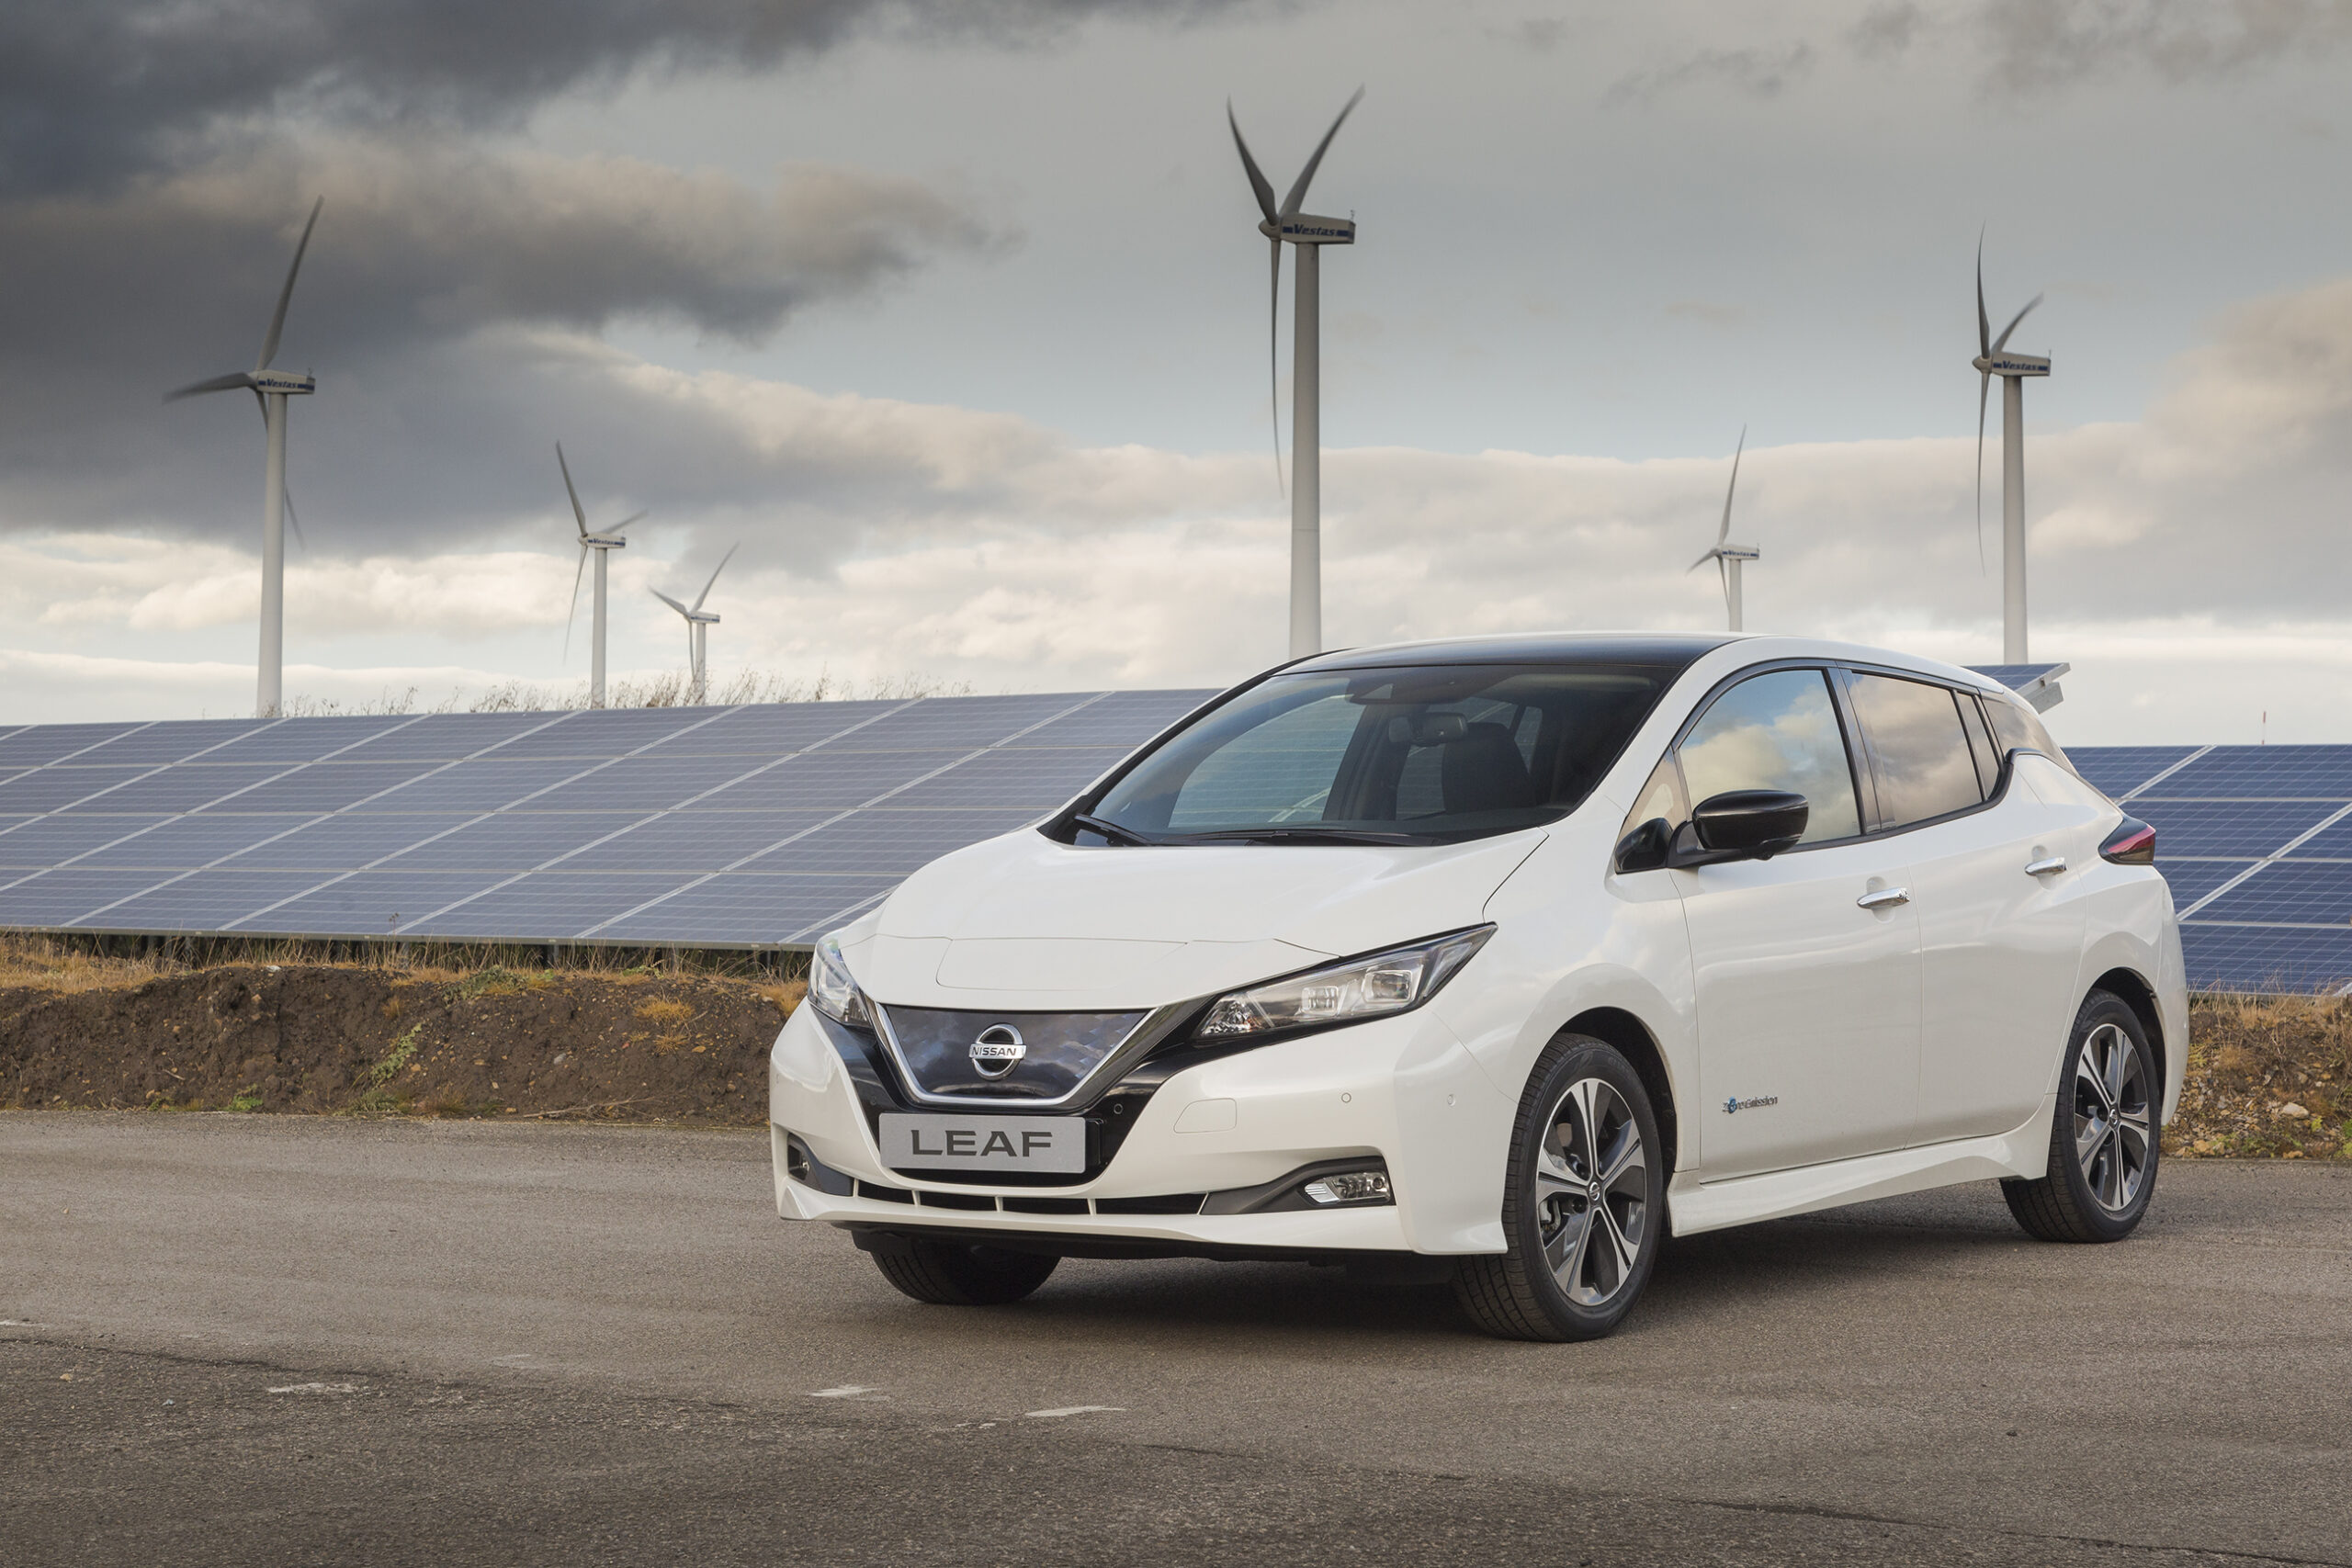 Nissan makes plans to expand renewable energy at its UK plant